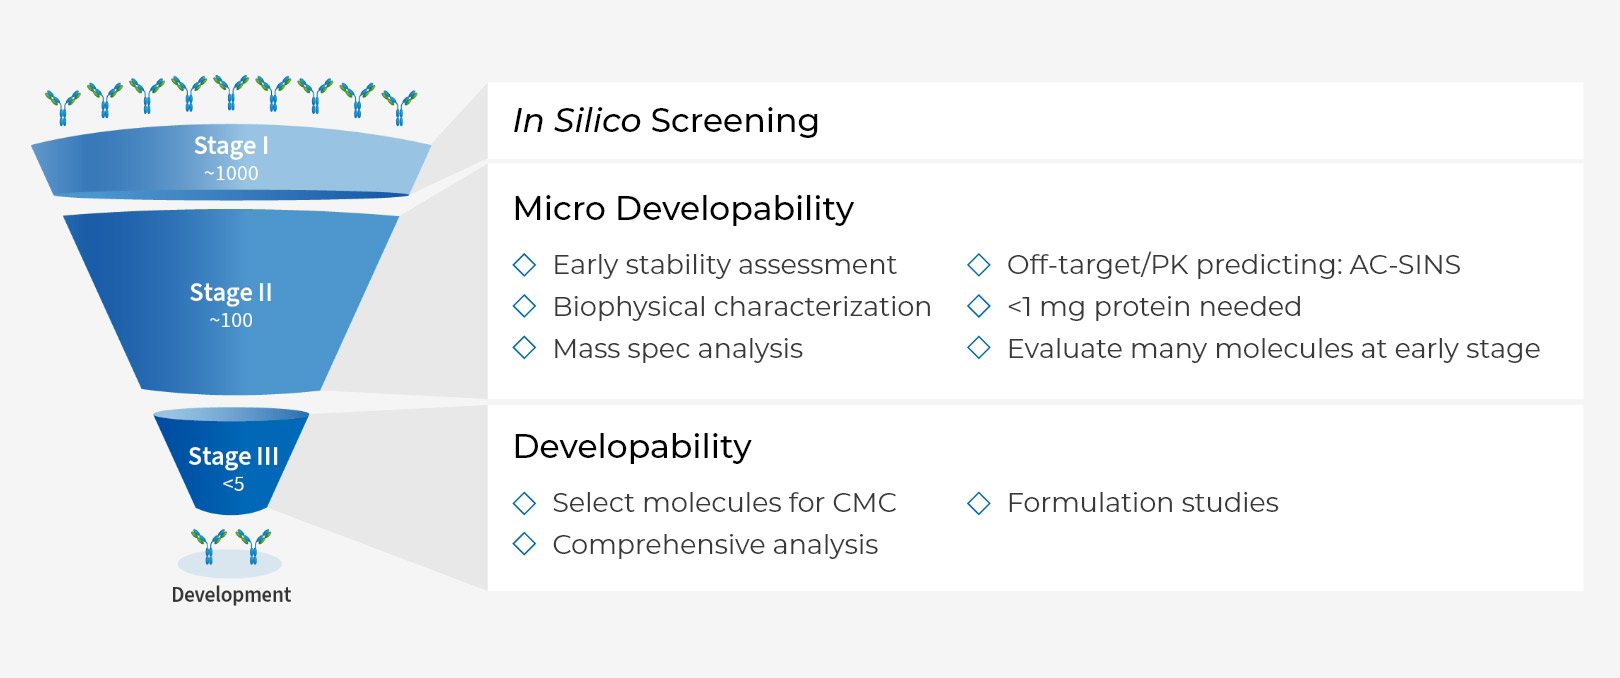 Our Micro Developability services cover in silico analysis, PK prediction, biophysical characterization via mass spec analysis, and early-stage product stability.